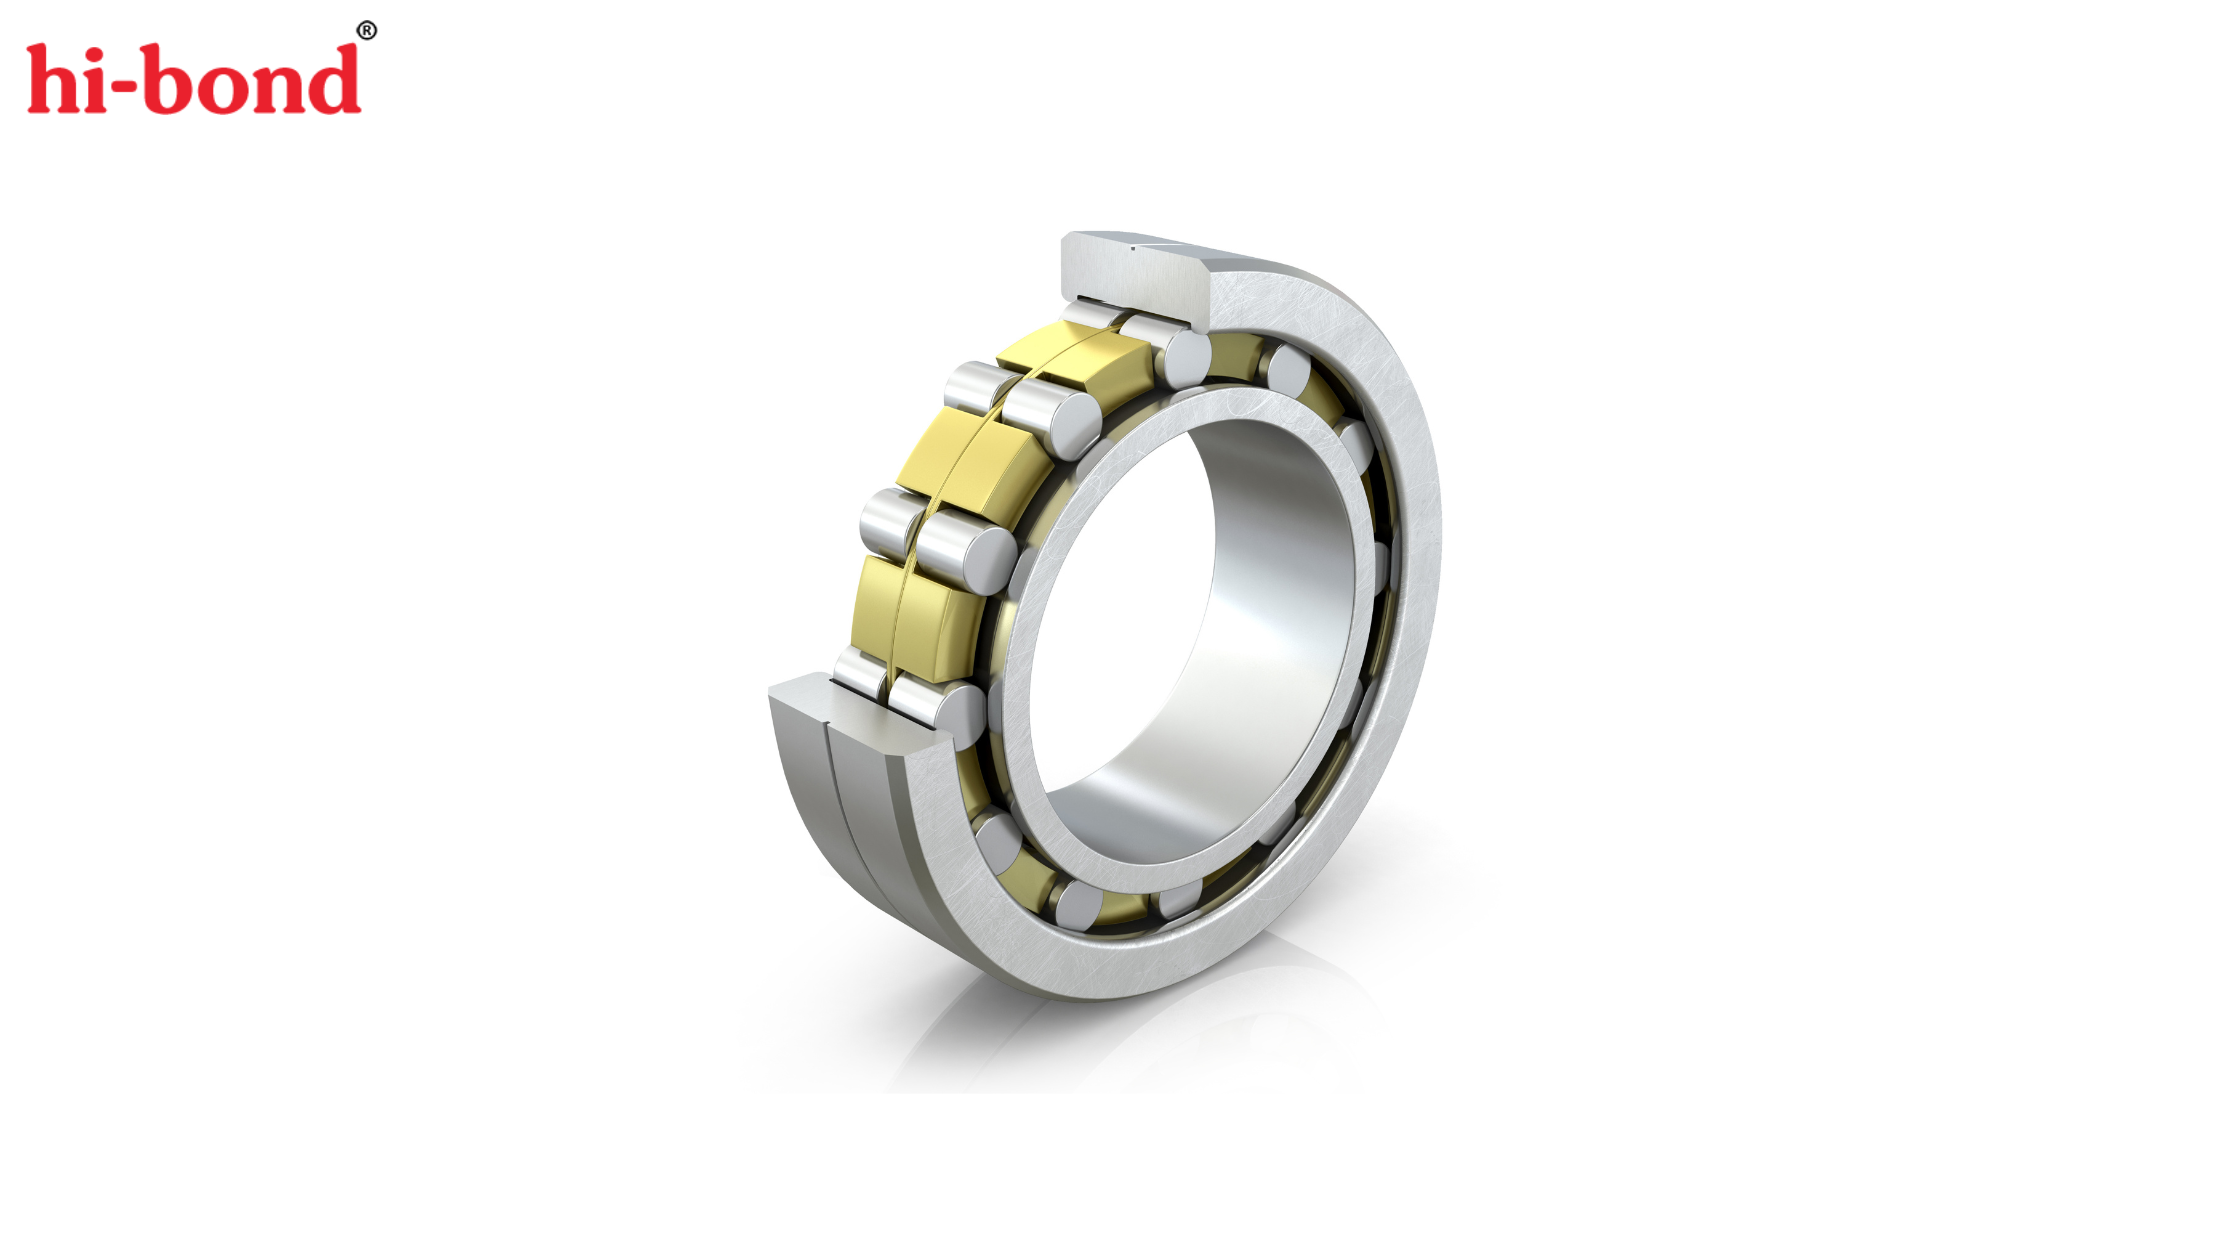 Uses of Cylindrical Roller Bearings